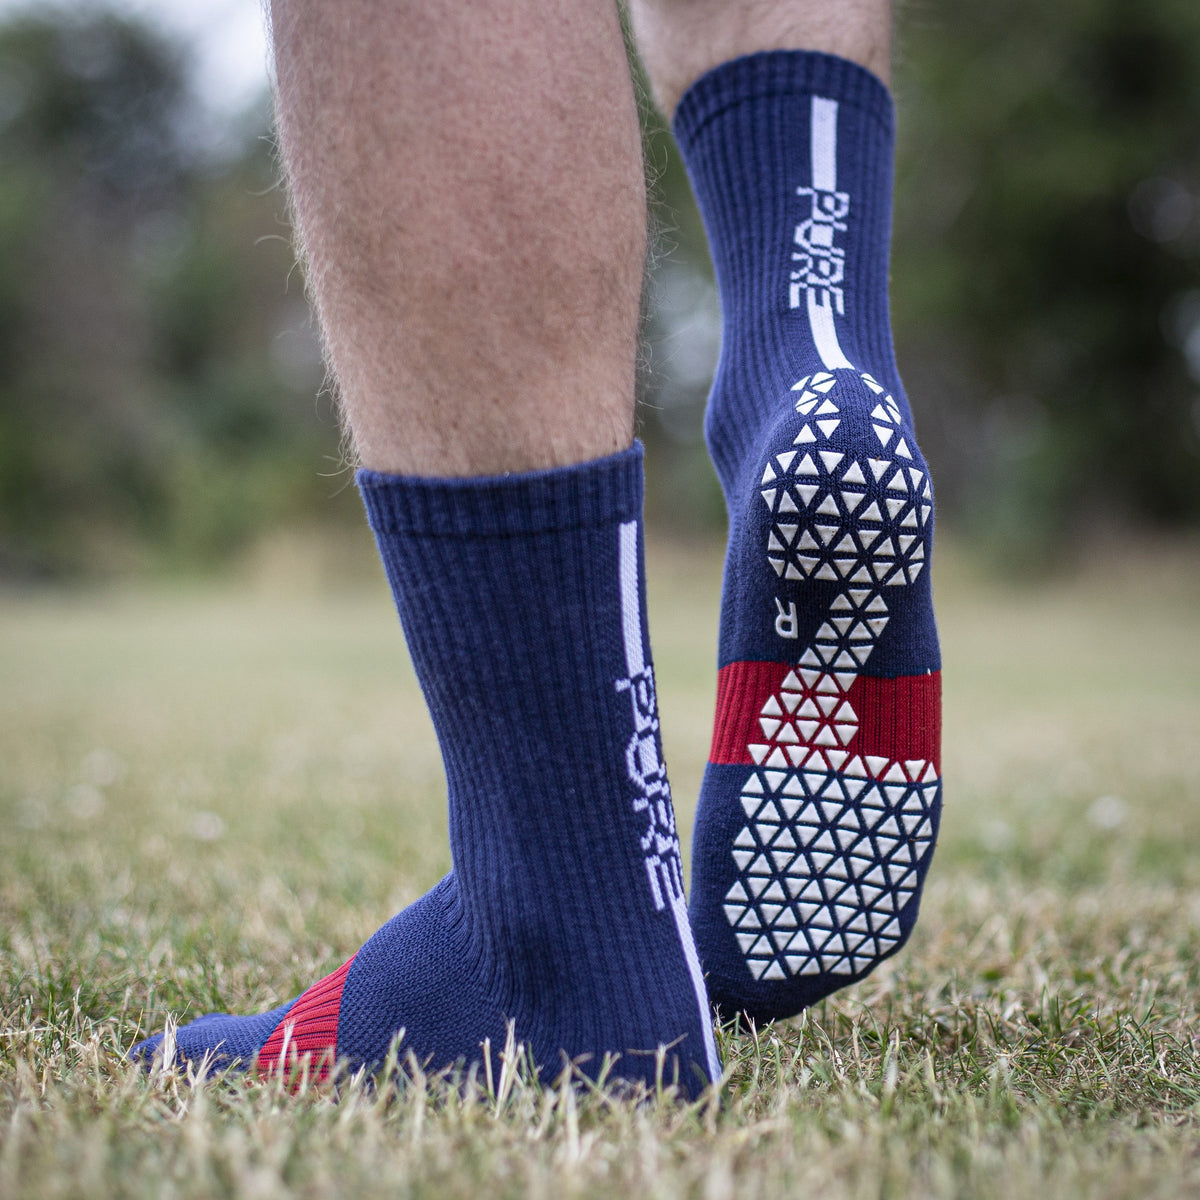 PURE GRIP SOCKS - Sports Contact